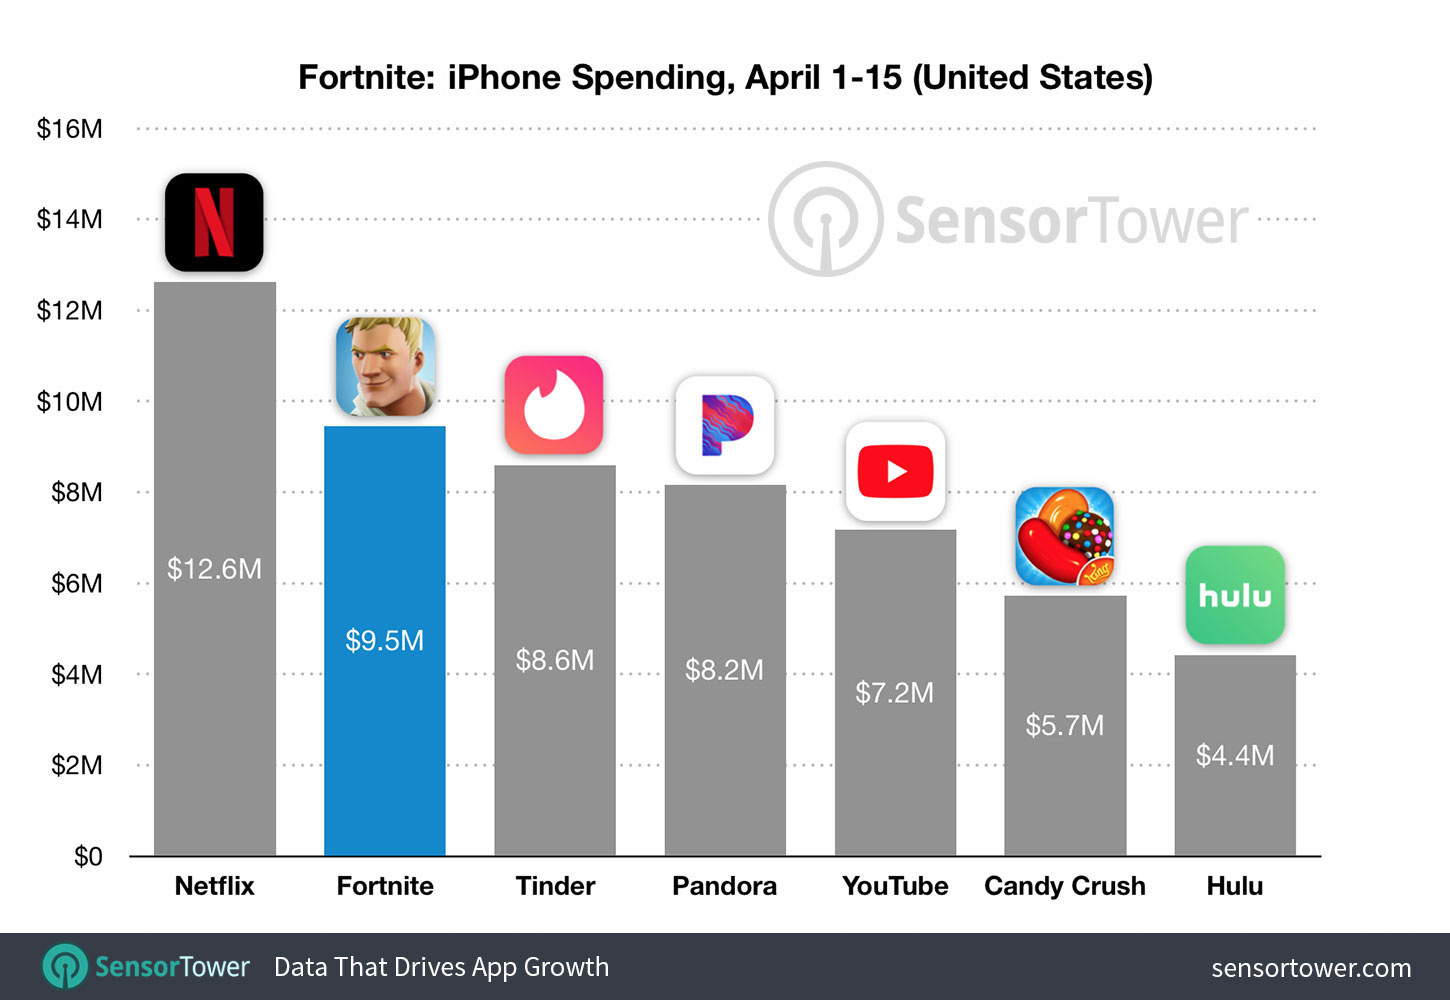 Chart showing Fortnite's gross revenue for April 1 to April 15, 2018 on iPhone in the United States compared to other top grossing apps